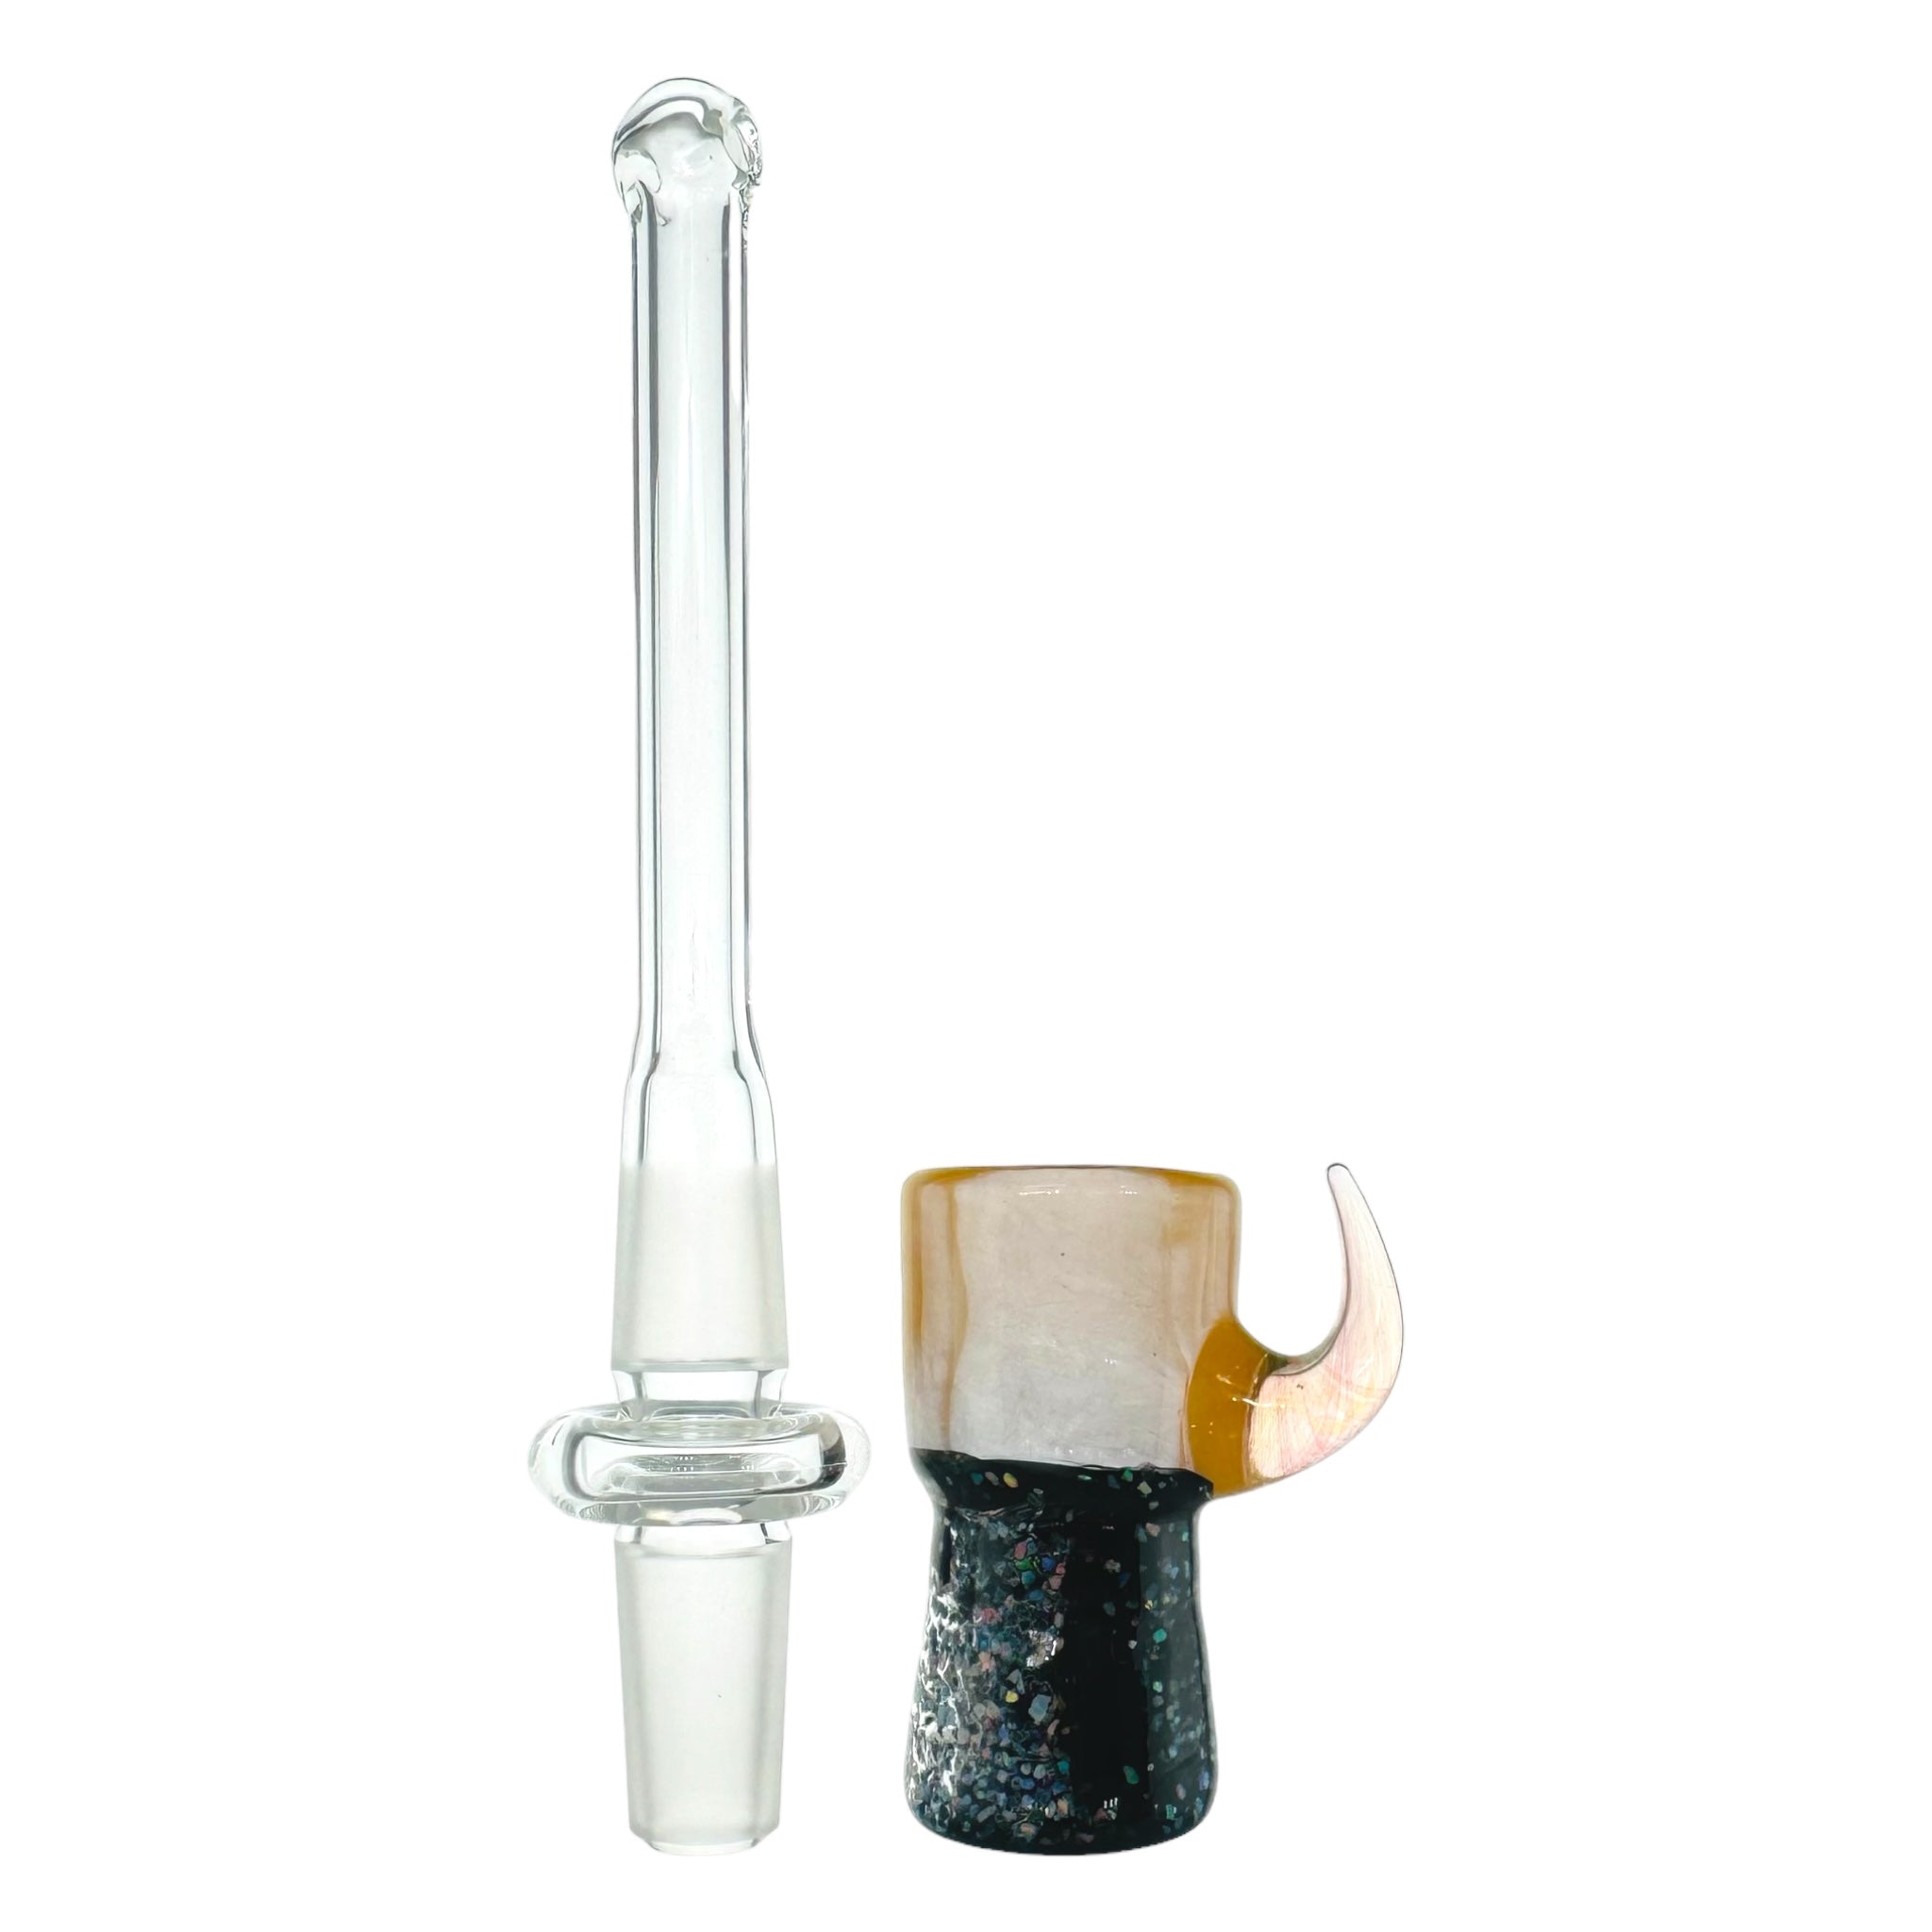 14mm - 14mm male downstem with matching heady dome